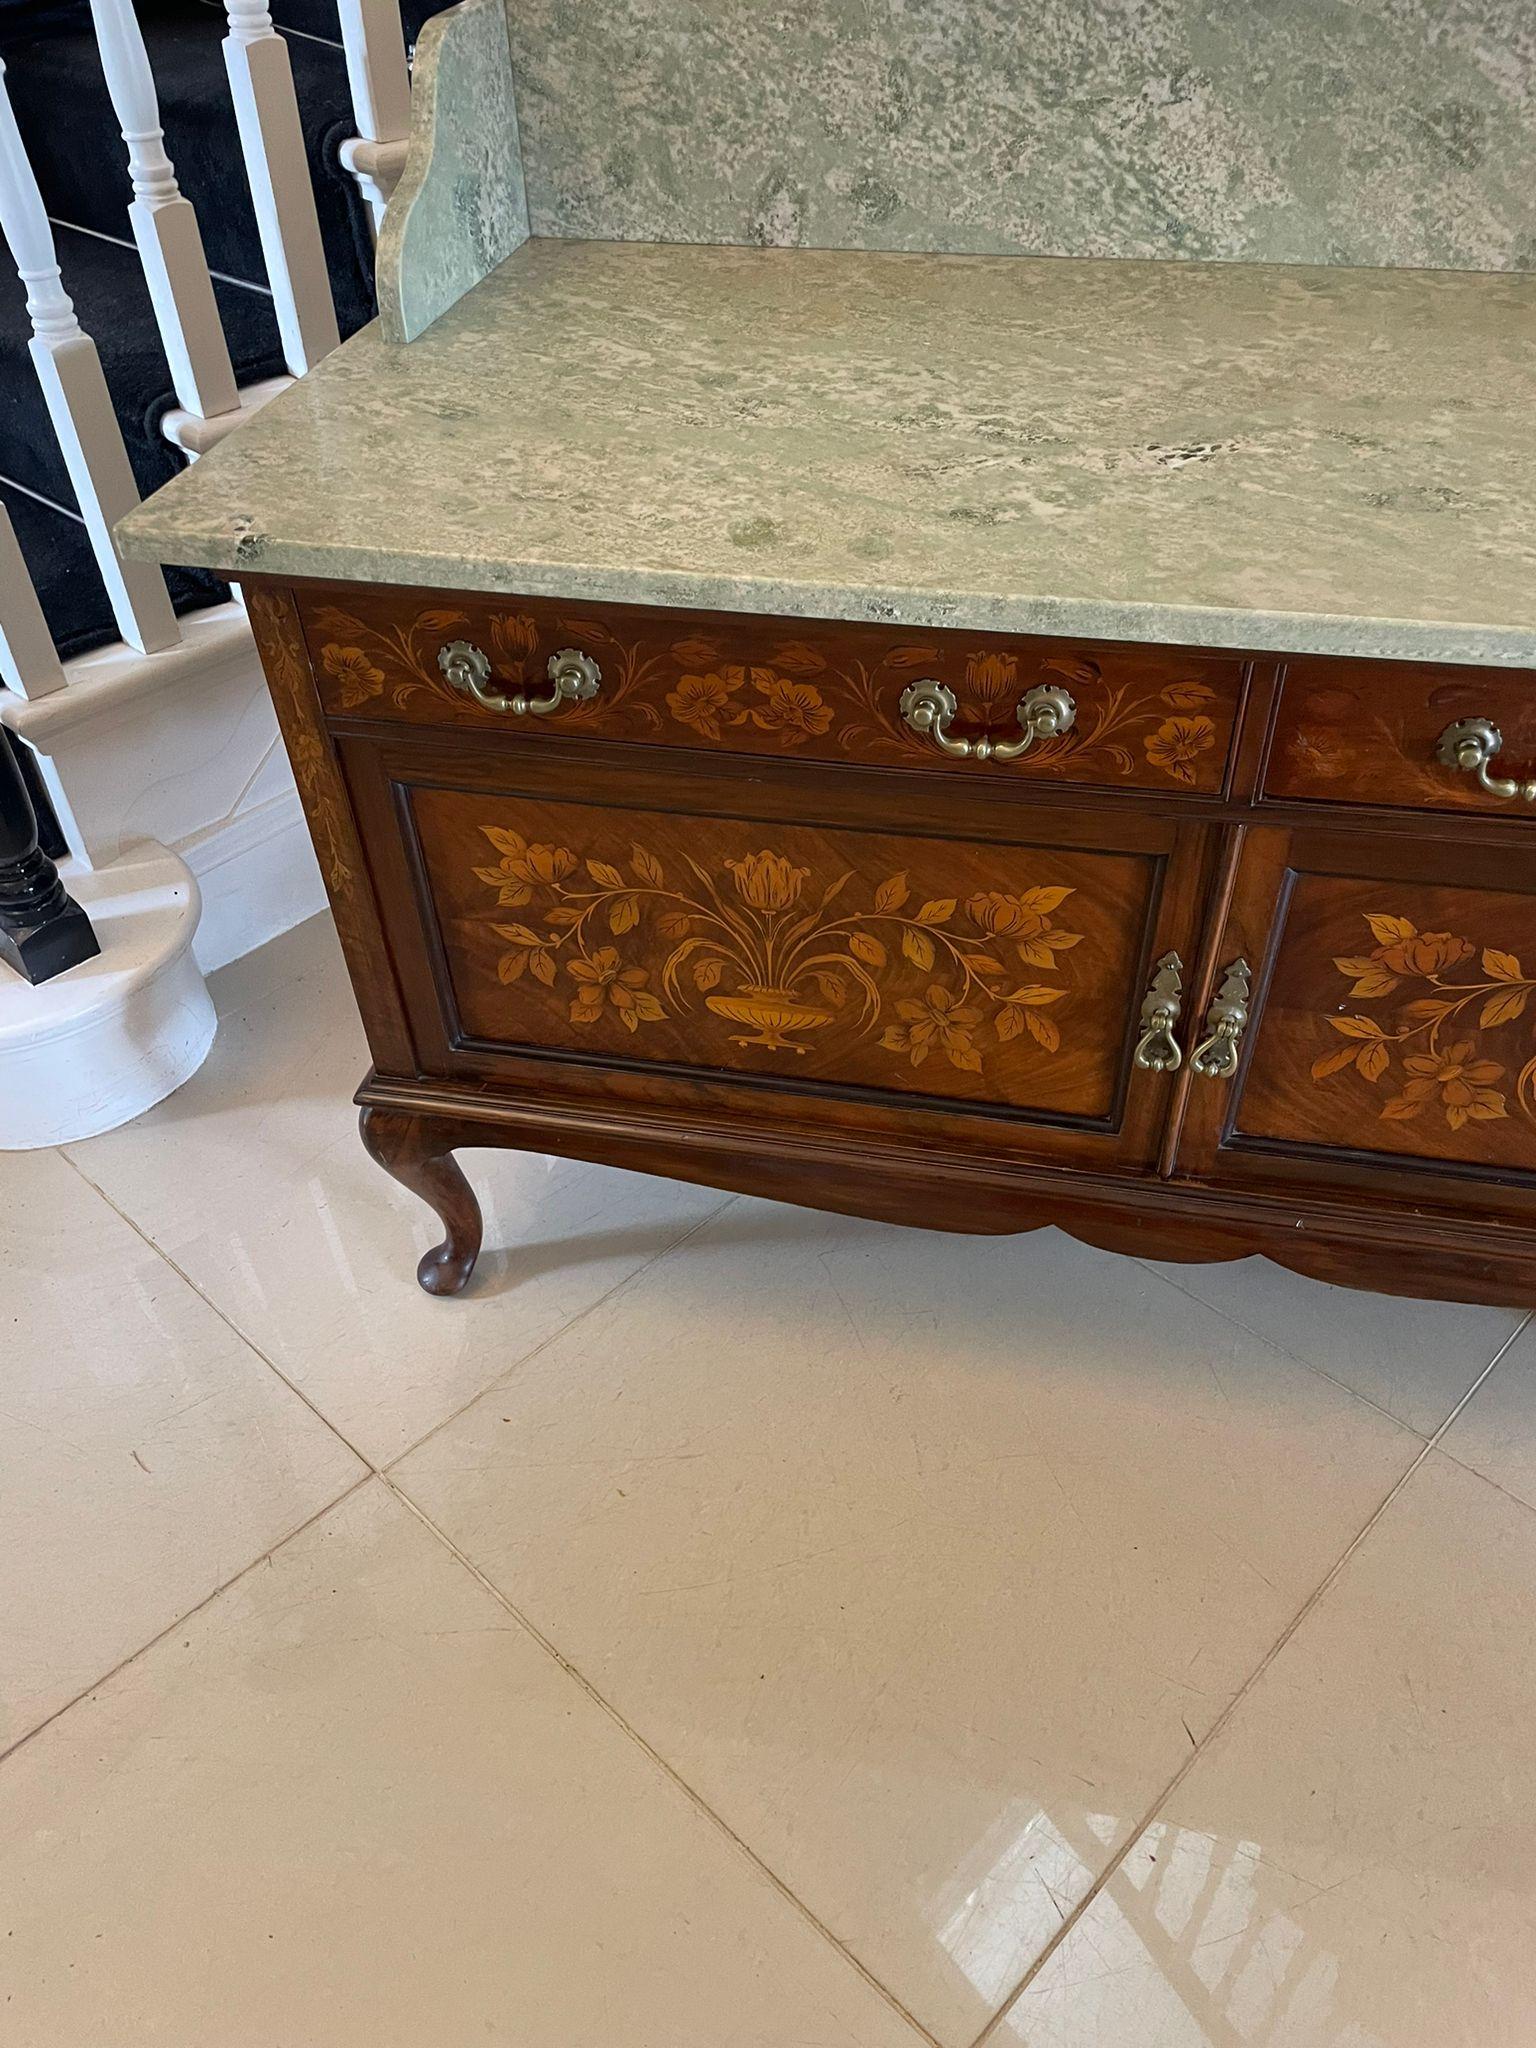 Outstanding quality antique Victorian figured walnut floral marquetry inlaid marble top washstand/cabinet having an outstanding quality light and dark green coloured marble top above two figured walnut floral marquetry inlaid drawers with original